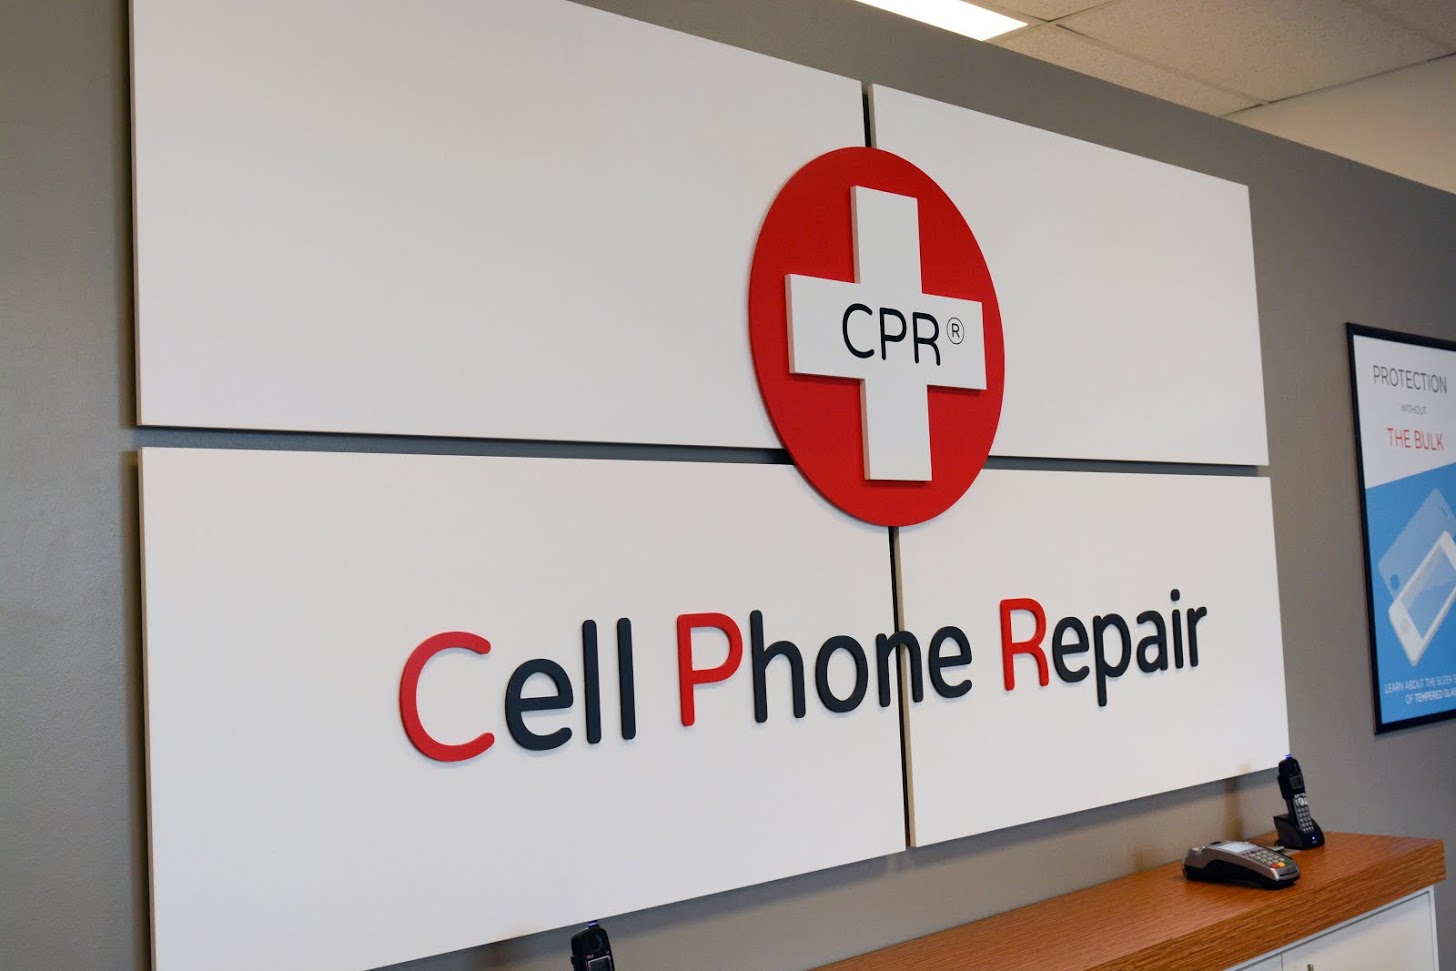 CPR Cell Phone Repair, Wednesday, September 4, 2019, Press release picture